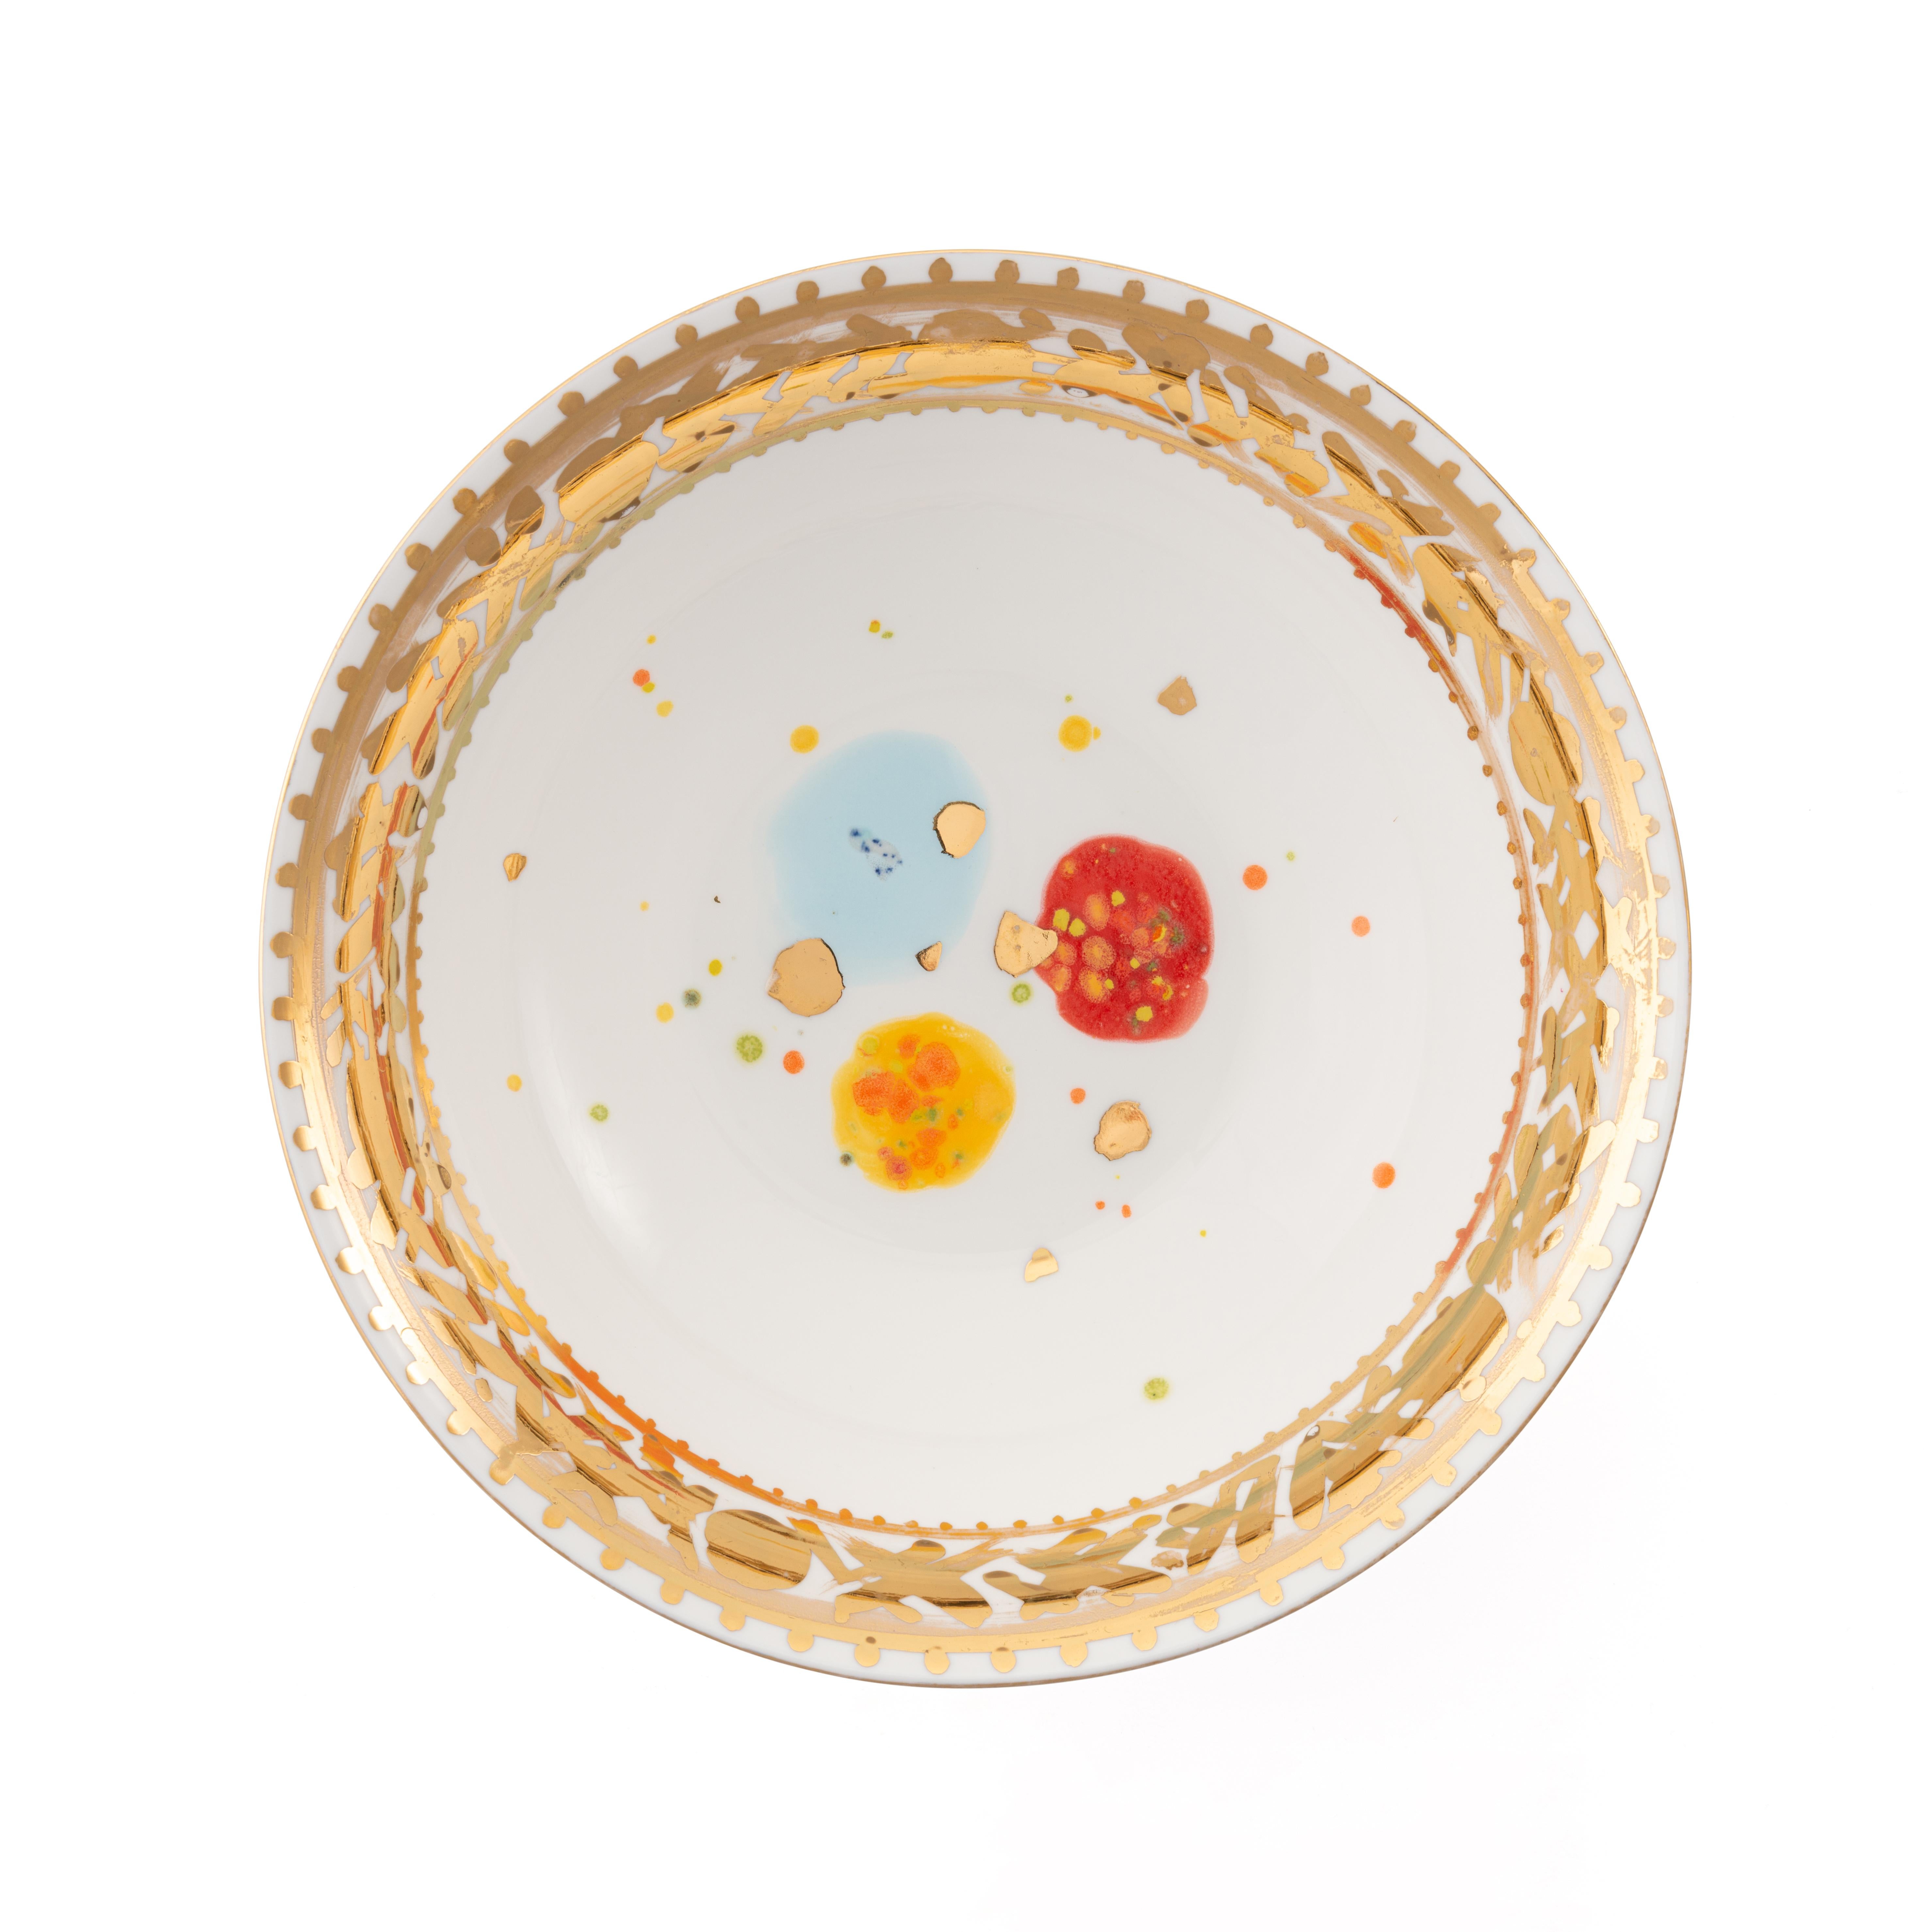 Hand painted in Italy from the finest porcelain, this Caravaggio salad bowl underlines tradition thanks to its expressive decoration of big red, yellow and light-blue splotches, where passions are contained in a rich gold rim with Classic